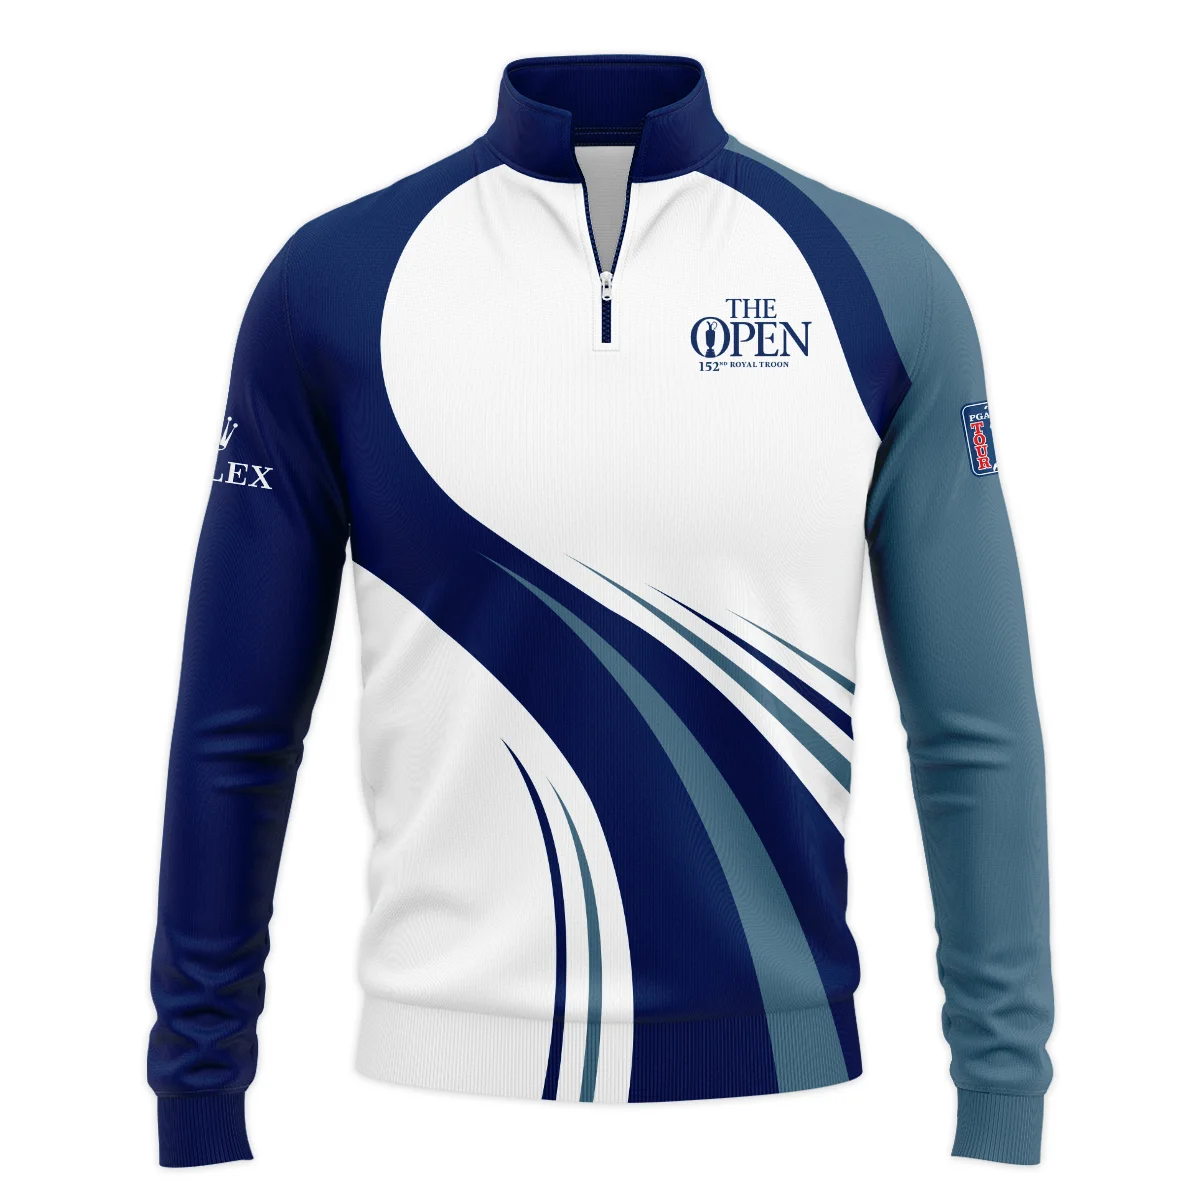 152nd Open Championship Rolex White Mostly Desaturated Dark Blue Quarter-Zip Jacket All Over Prints HOTOP270624A02ROXSWZ